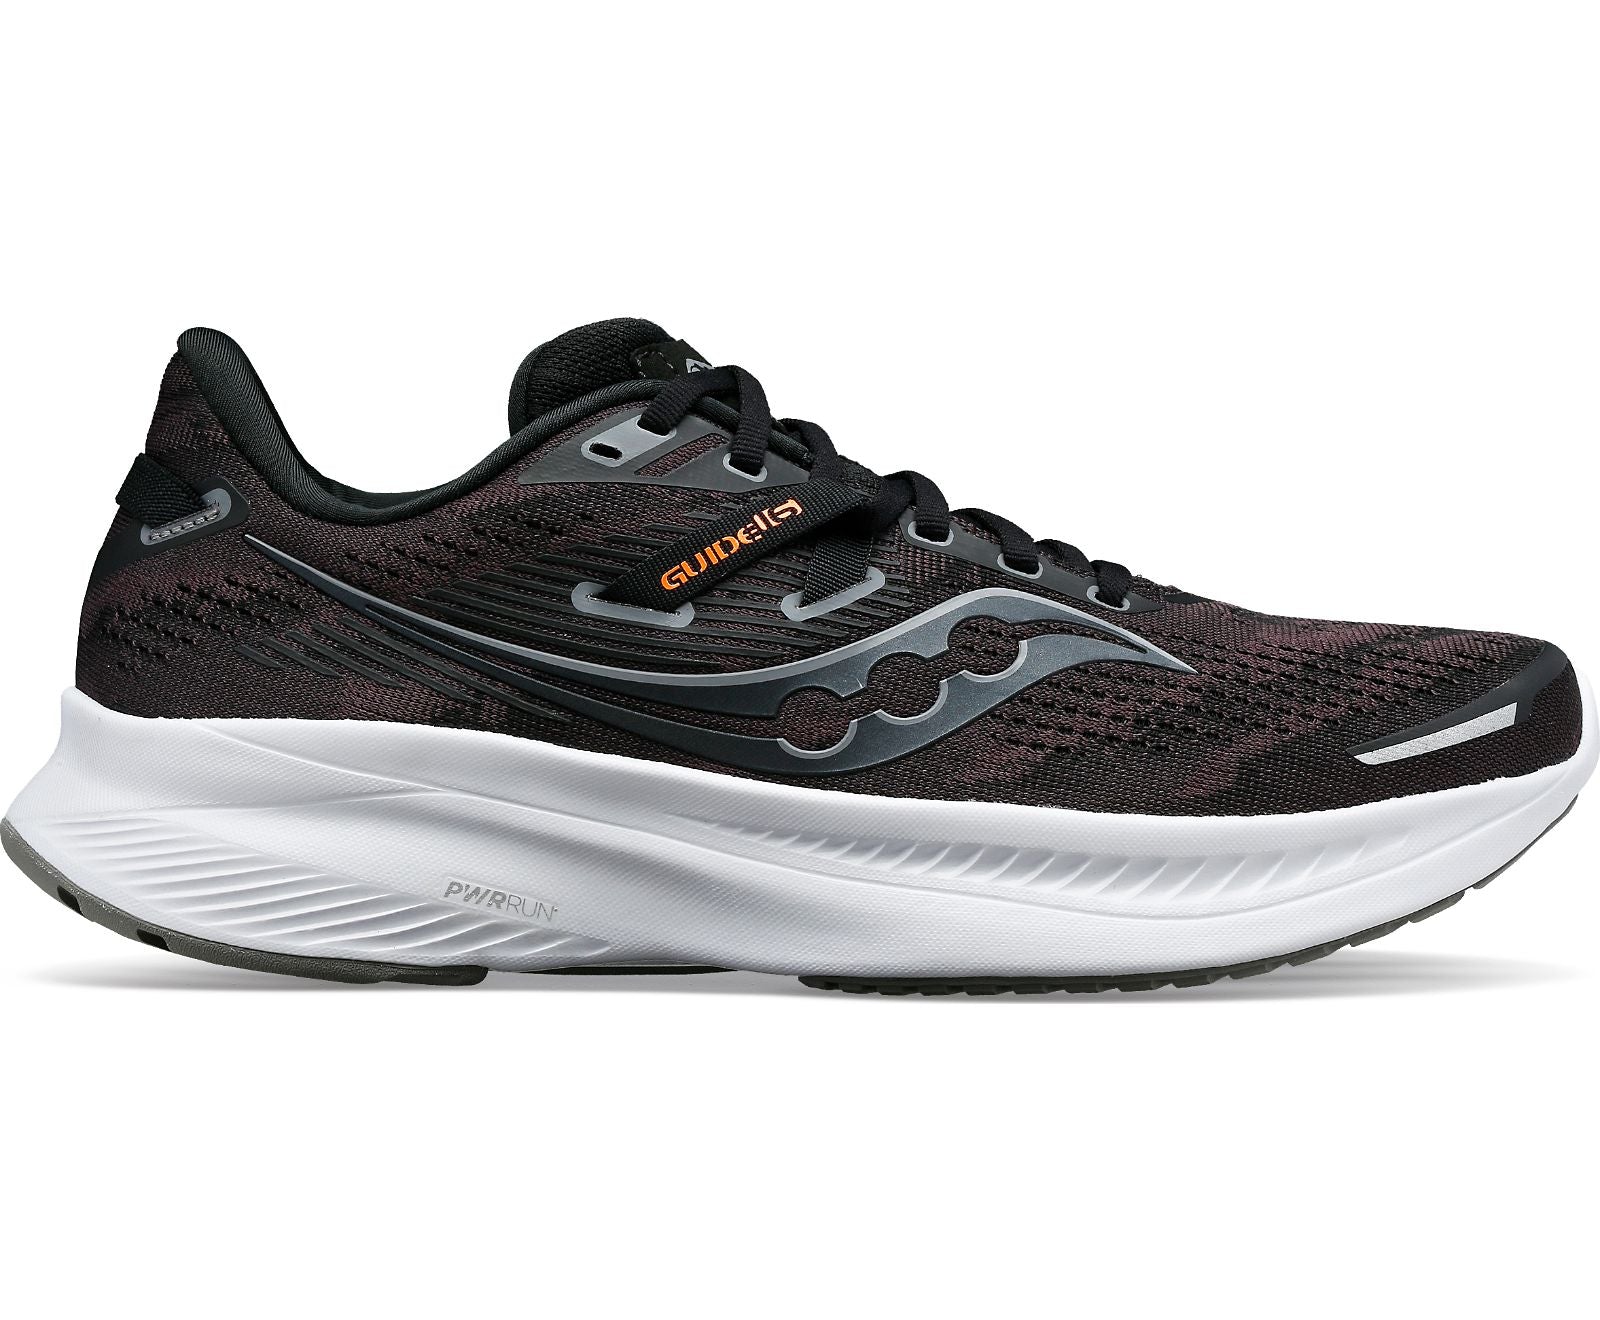 Lateral view of the Saucony Men's Guide 16 in the color Black/White